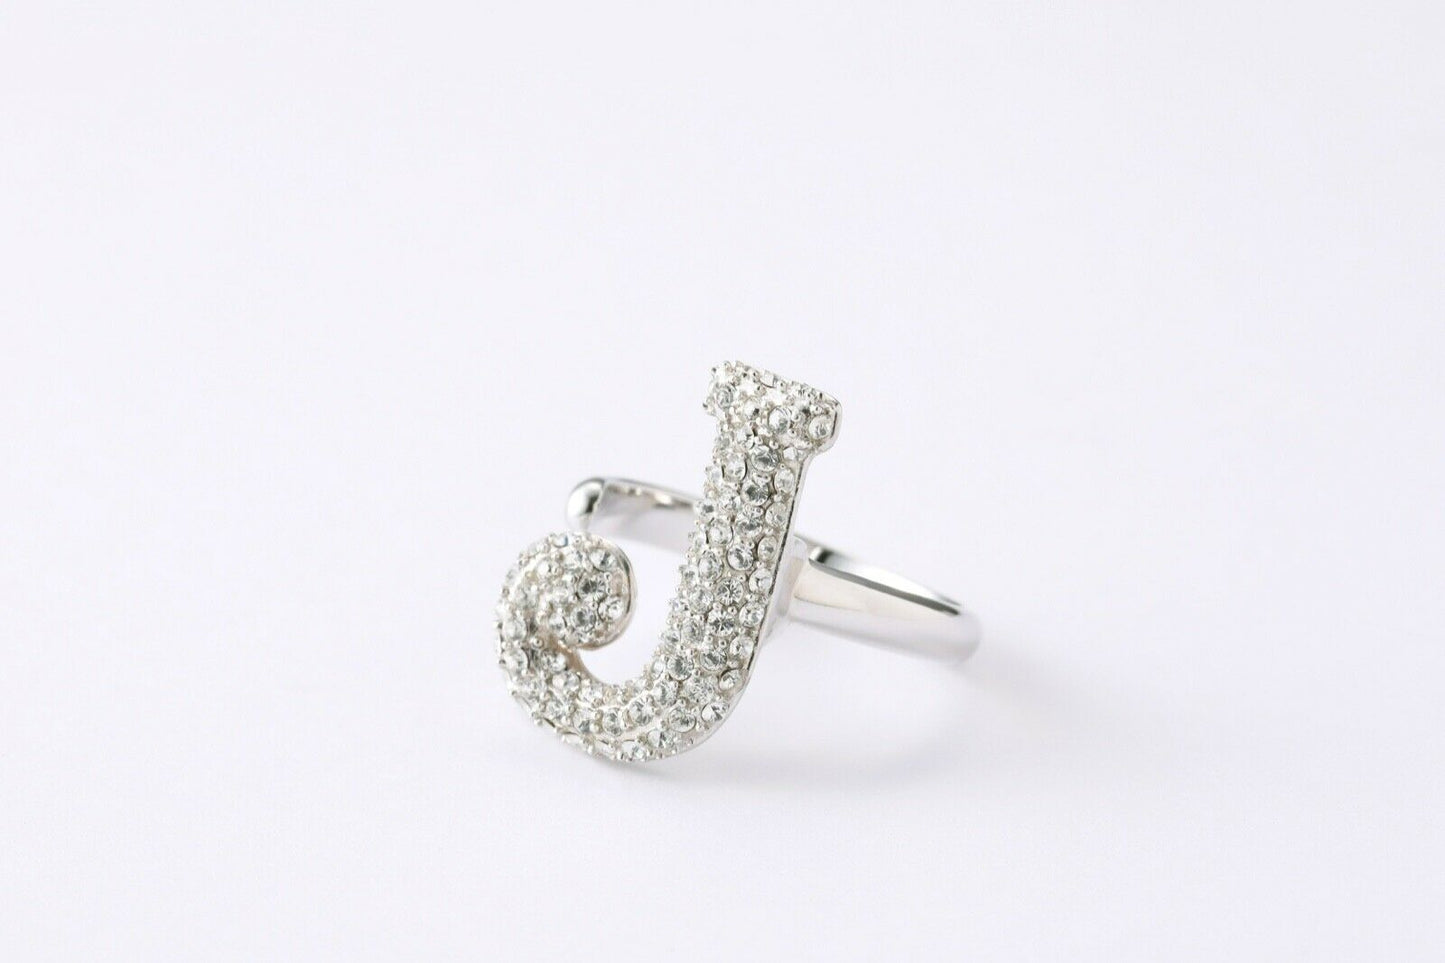 Alphabet Ring Initial J Swarovski Crystals Free Size Sterling Silver 925 Rhodium Plated